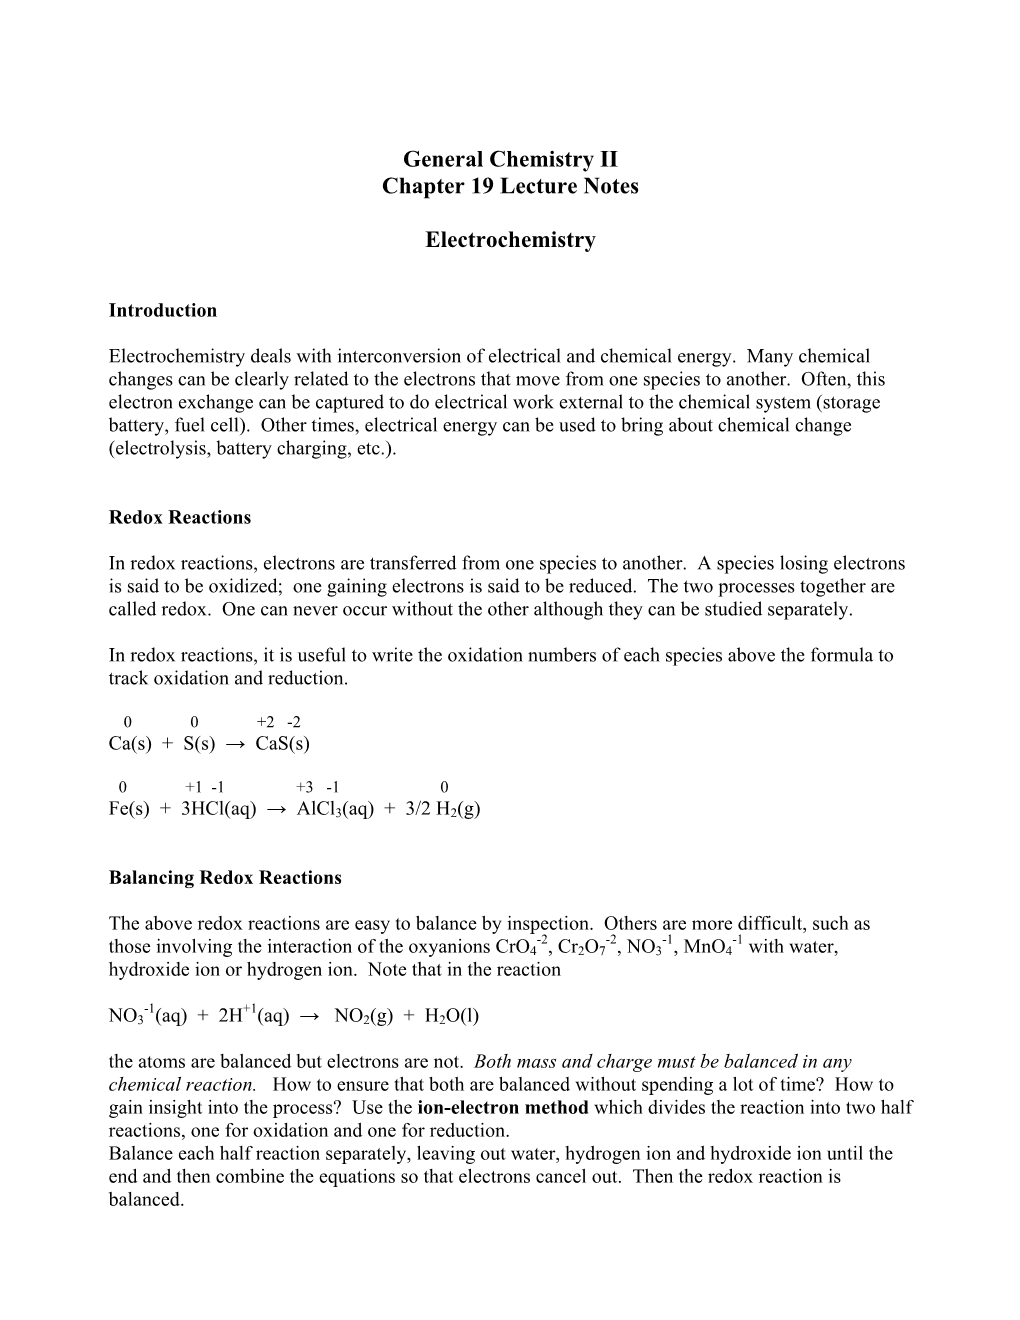 General Chemistry II Chapter 19 Lecture Notes Electrochemistry